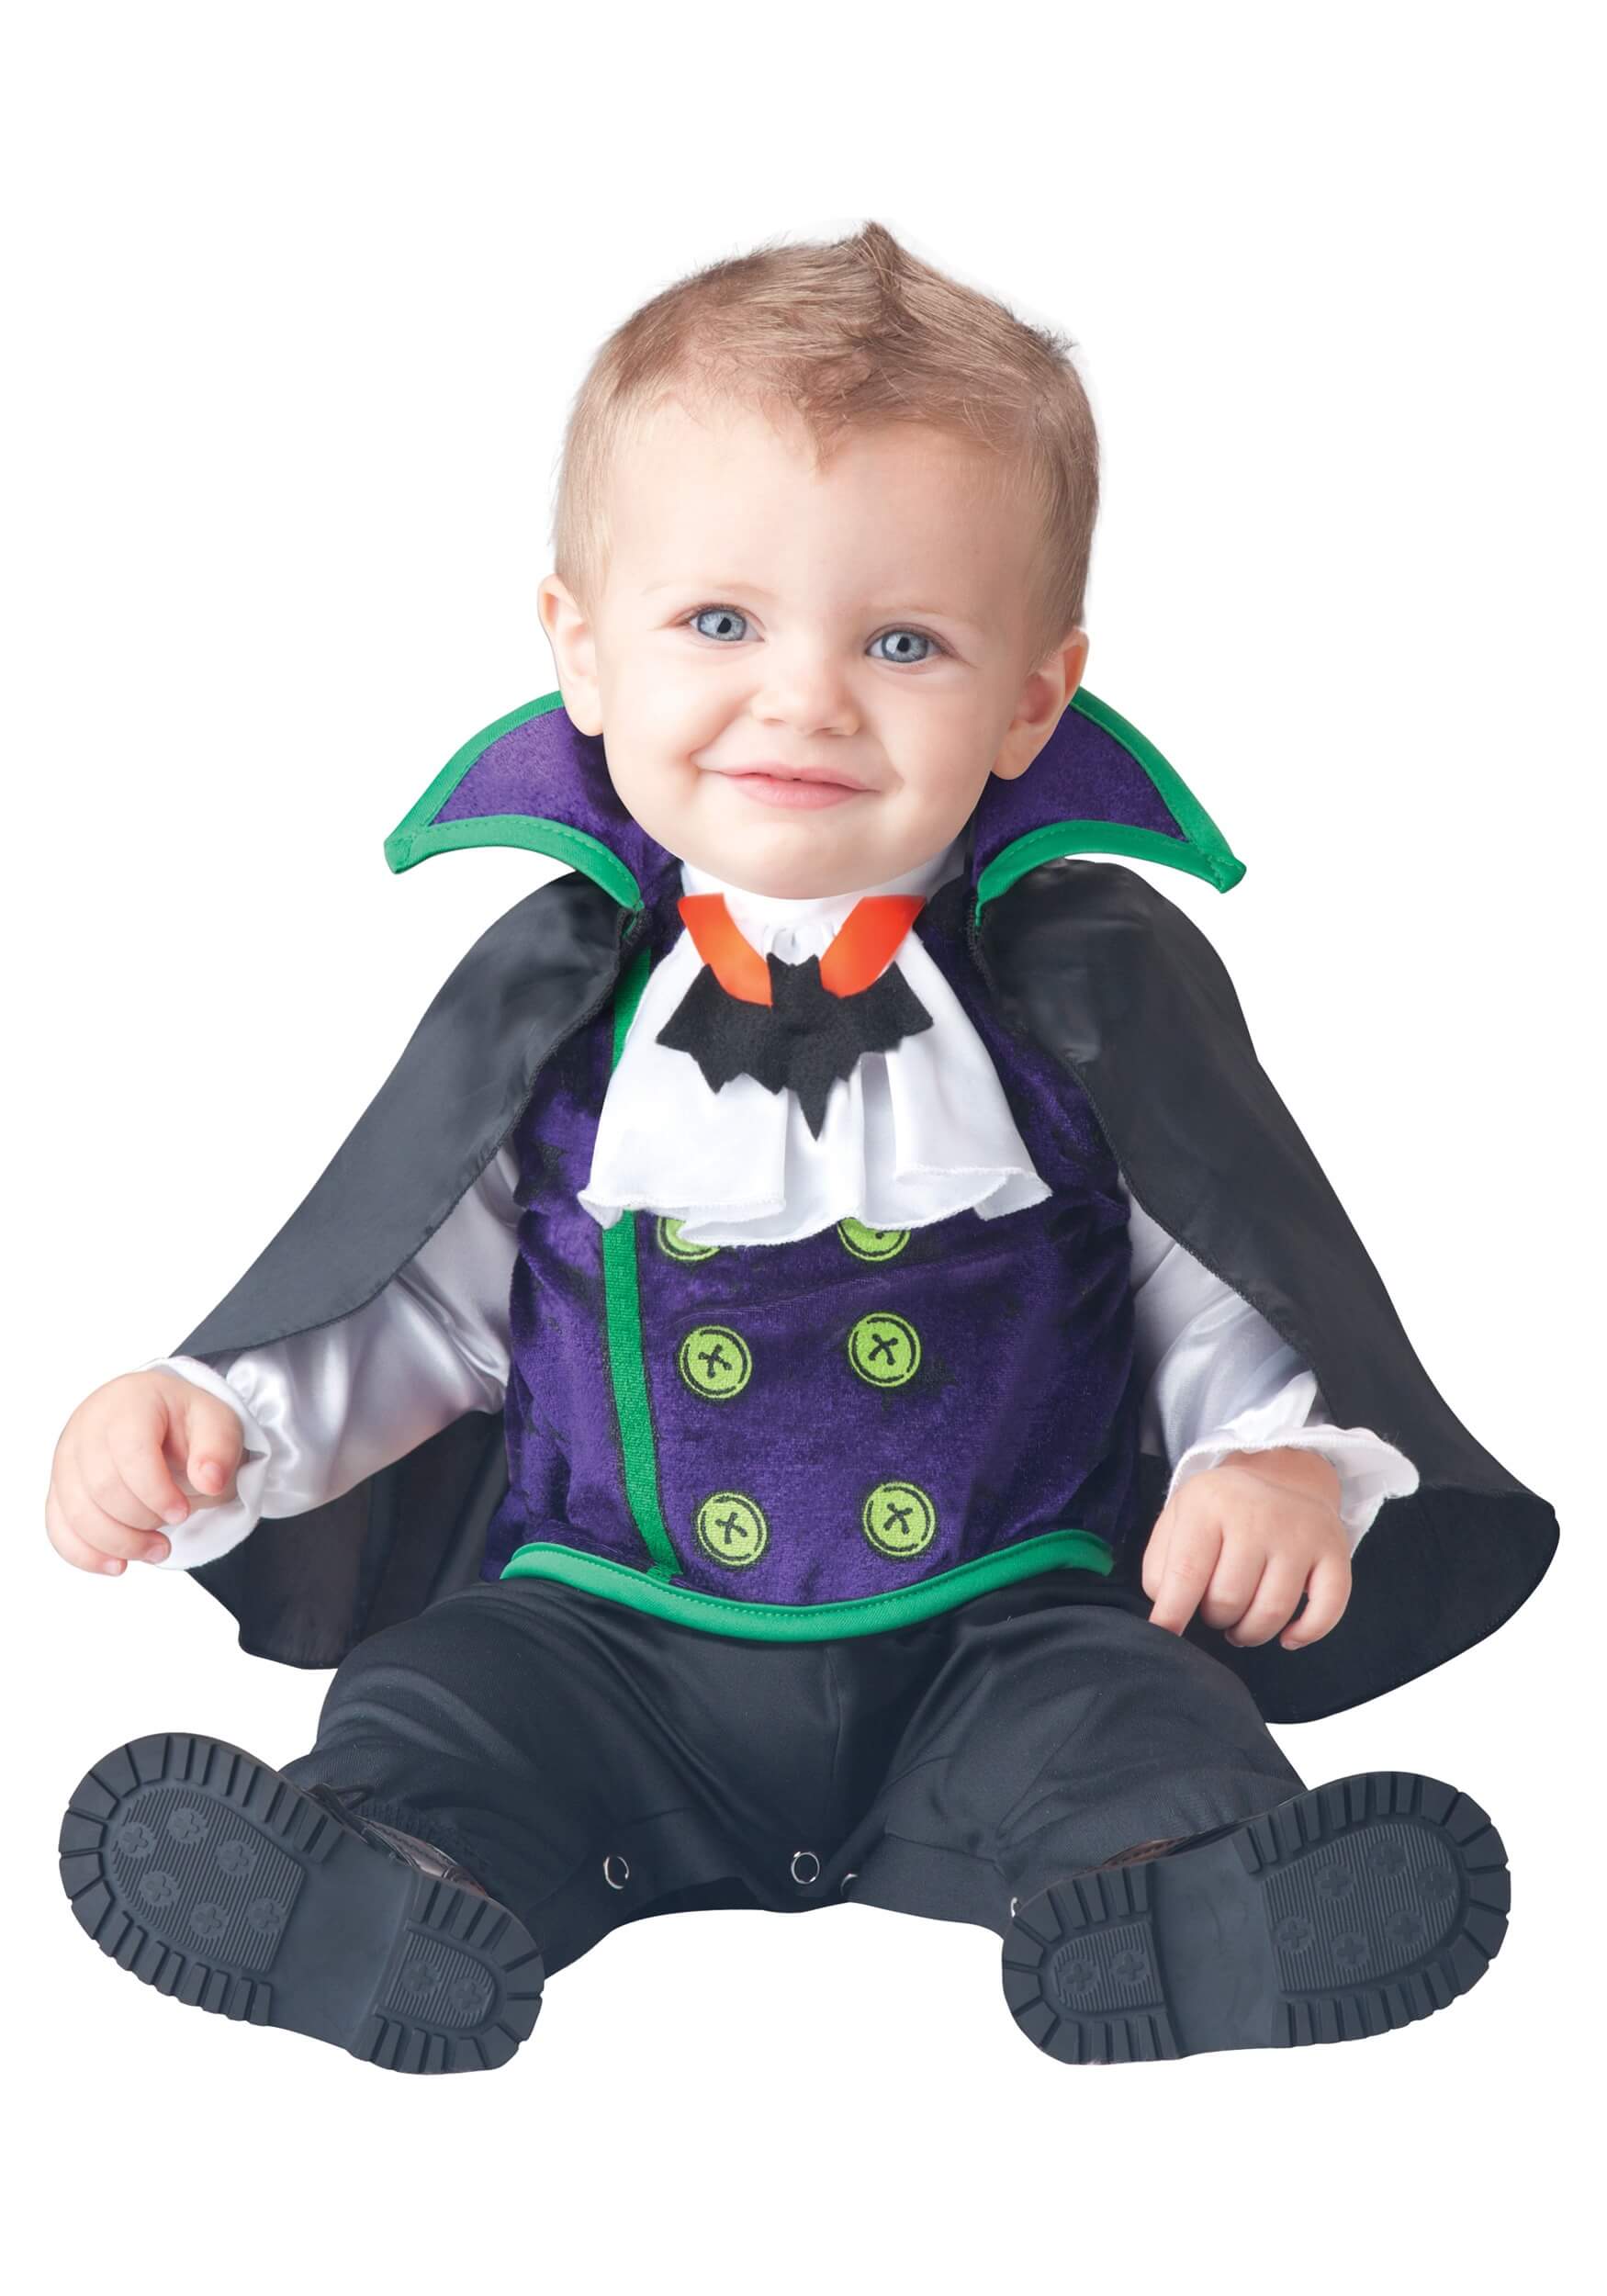 Adorable Halloween Costumes For Babies/Infants - Festival Around the World